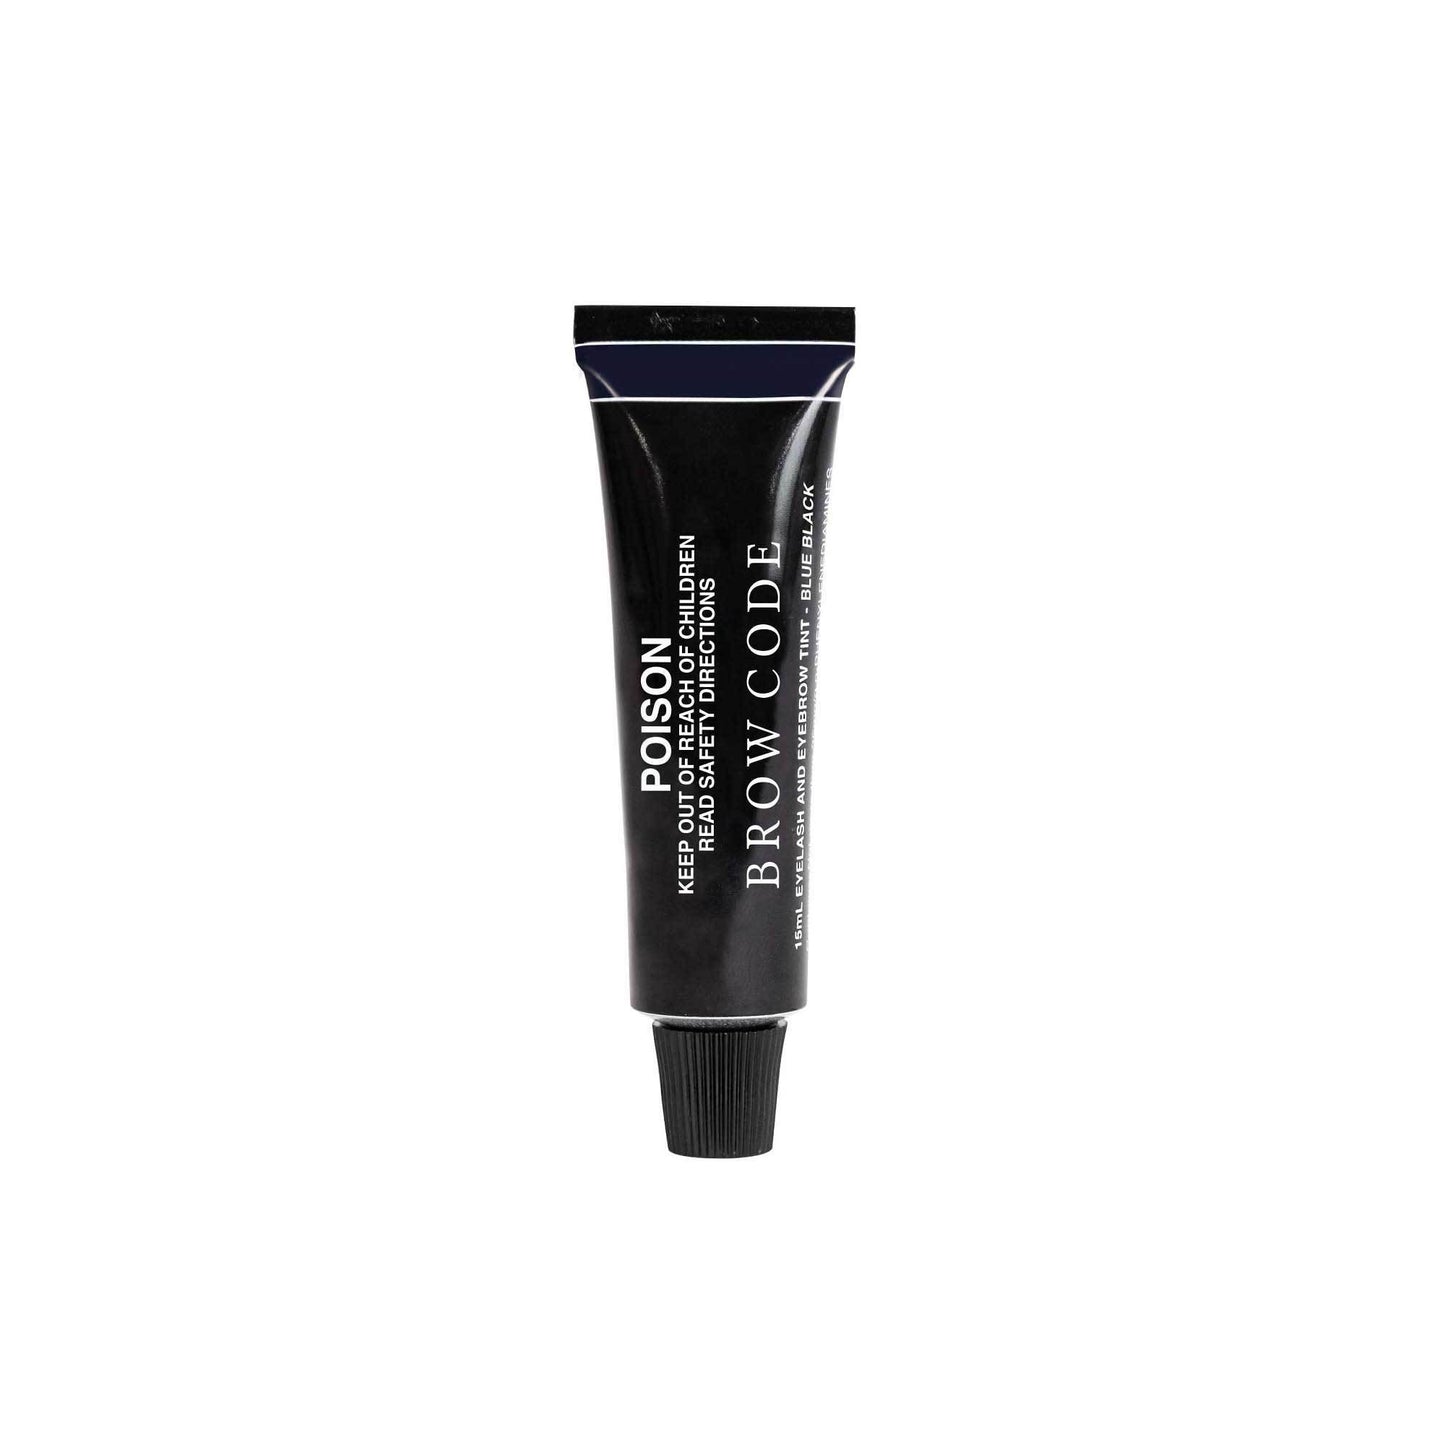 Brow Tint Tube - Color-Blue Black - Against a white background